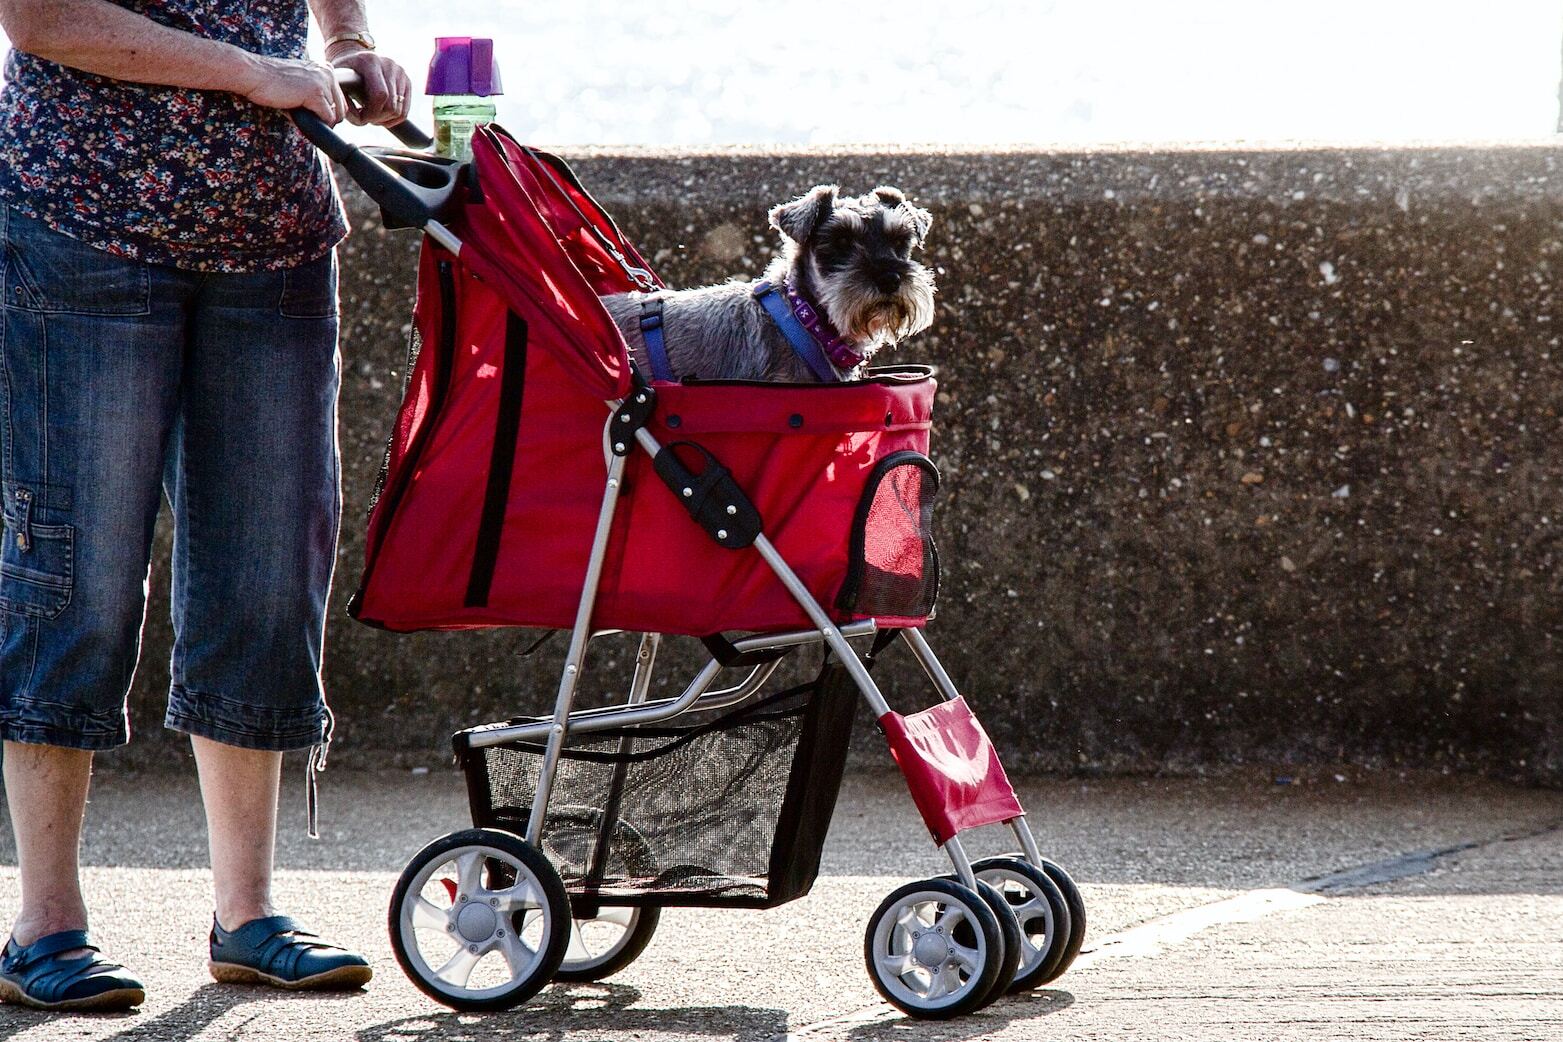 Small dog standing in red durable dog pram being pushed by owner outdoors on a walking path